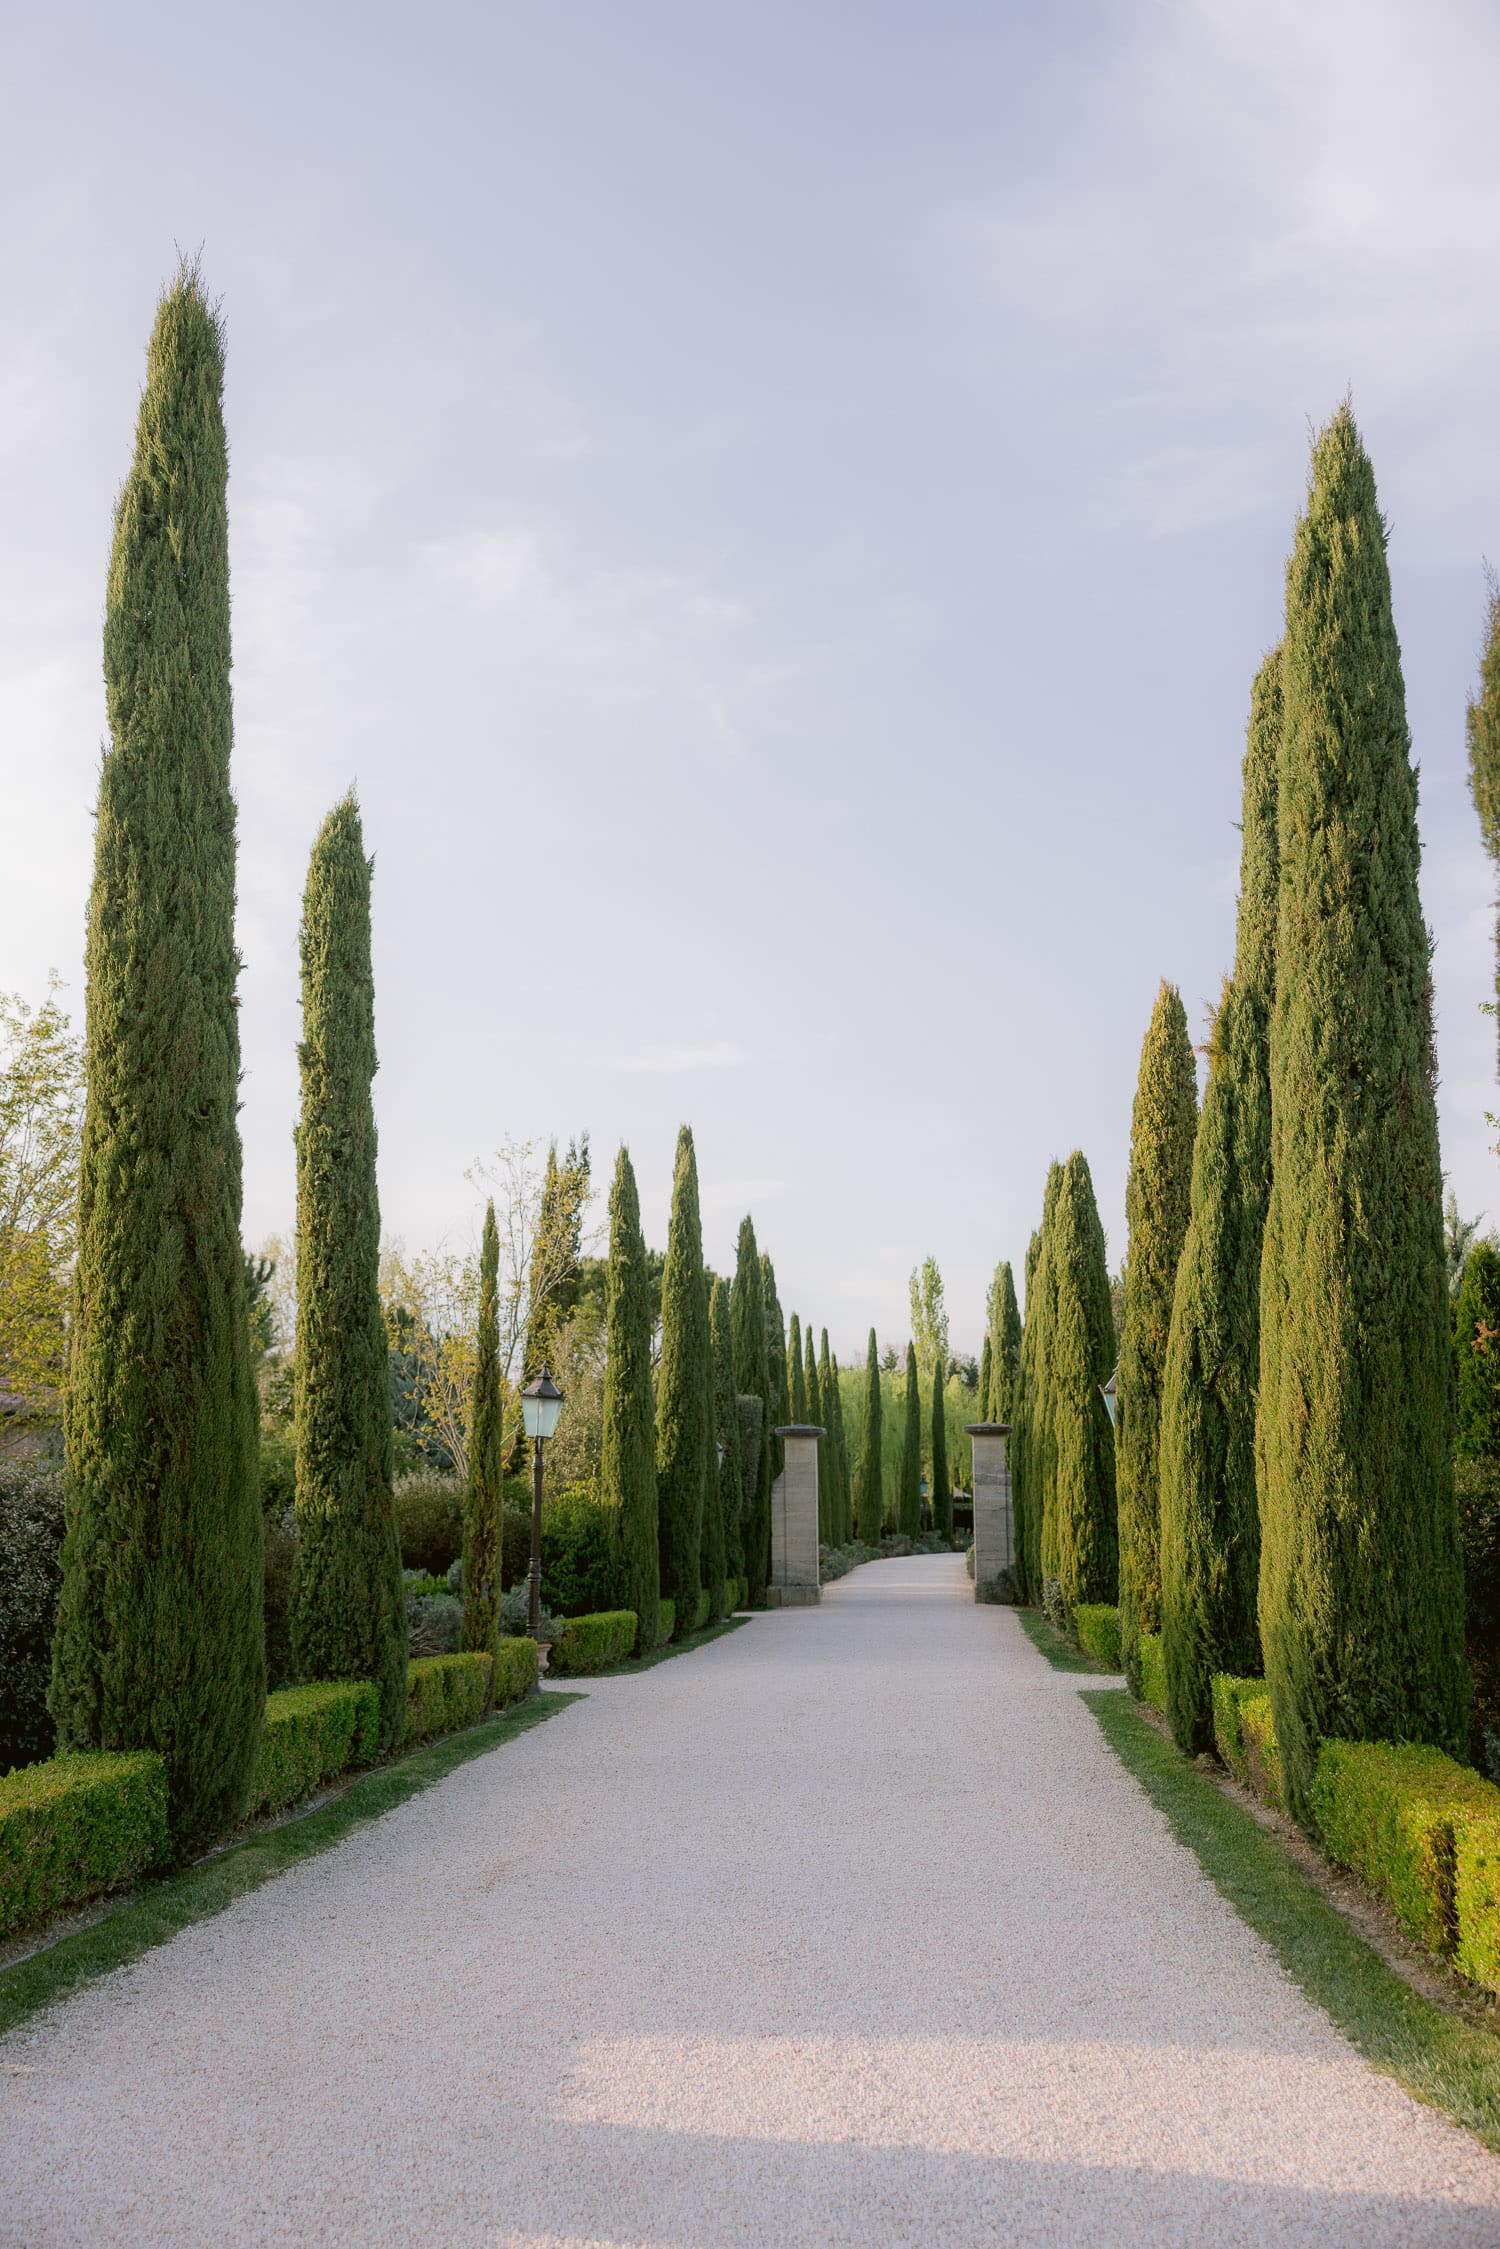 the road leading to the borgo Santo pietro with cypress trees aligned on the sides